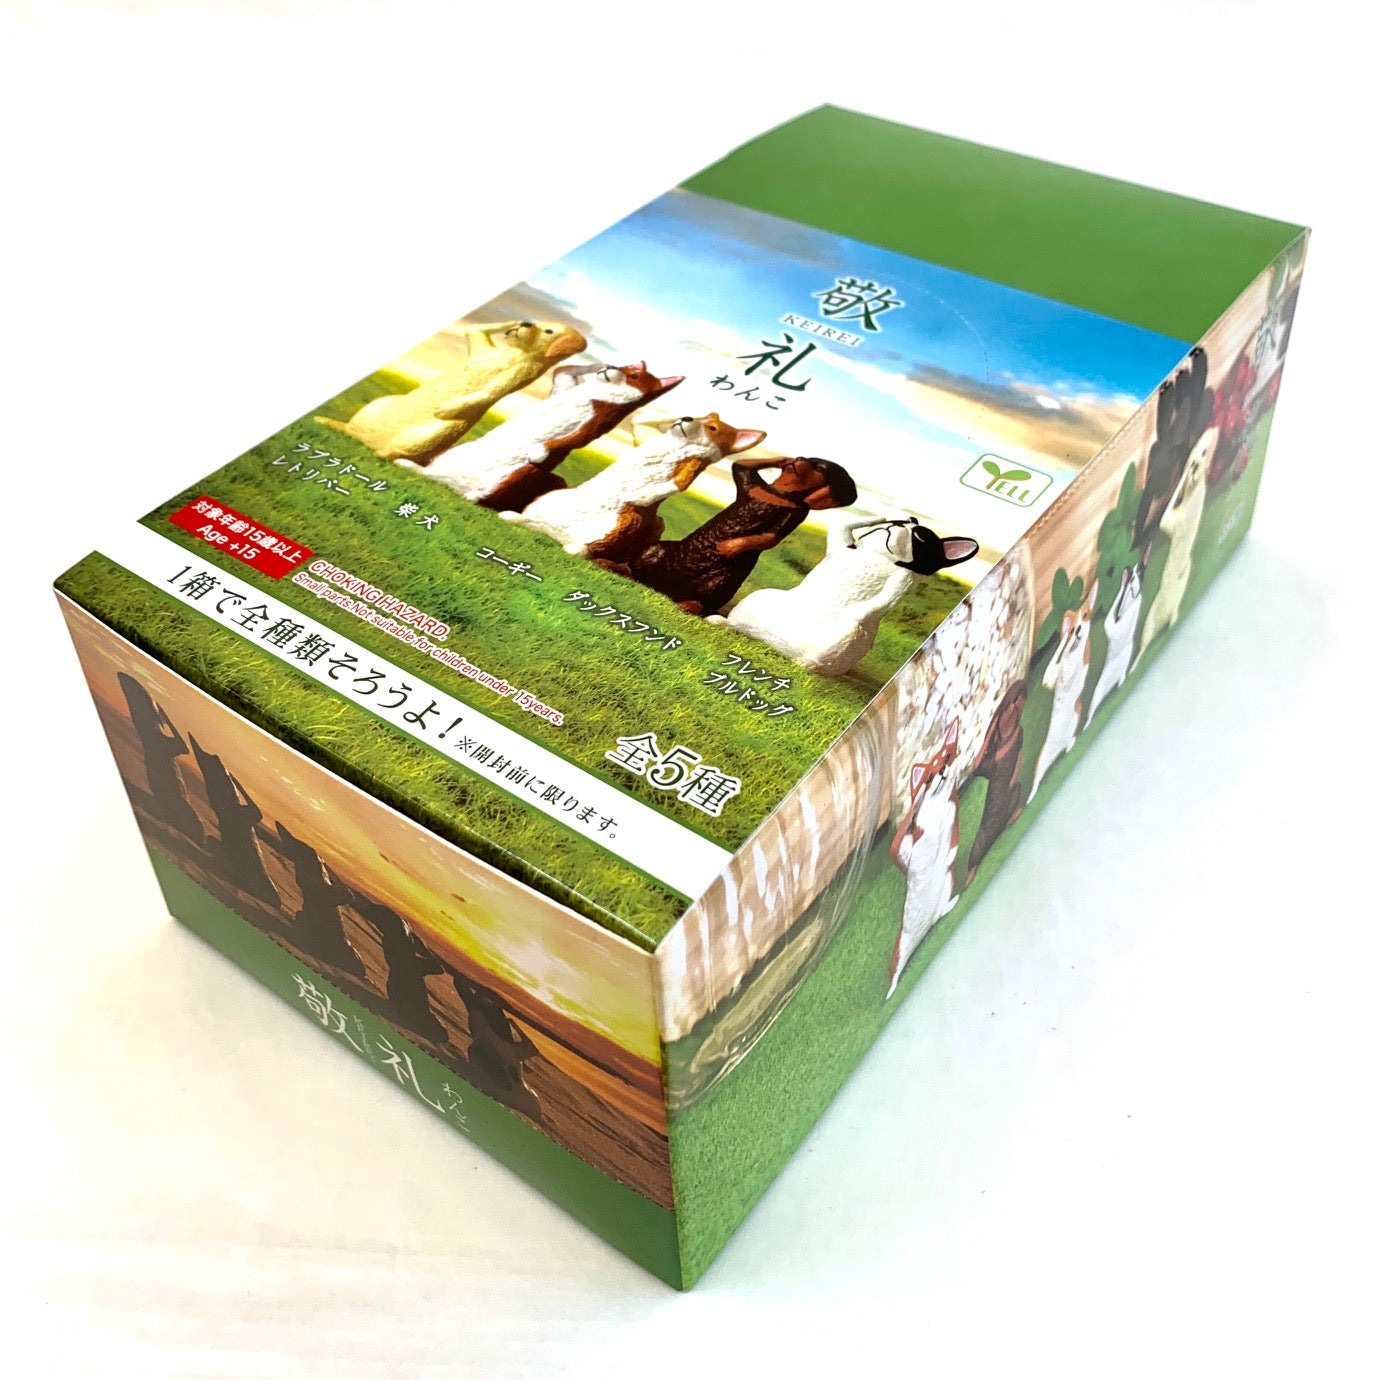 X 70733 SALUTING DOGS BLIND BOX-DISCONTINUED